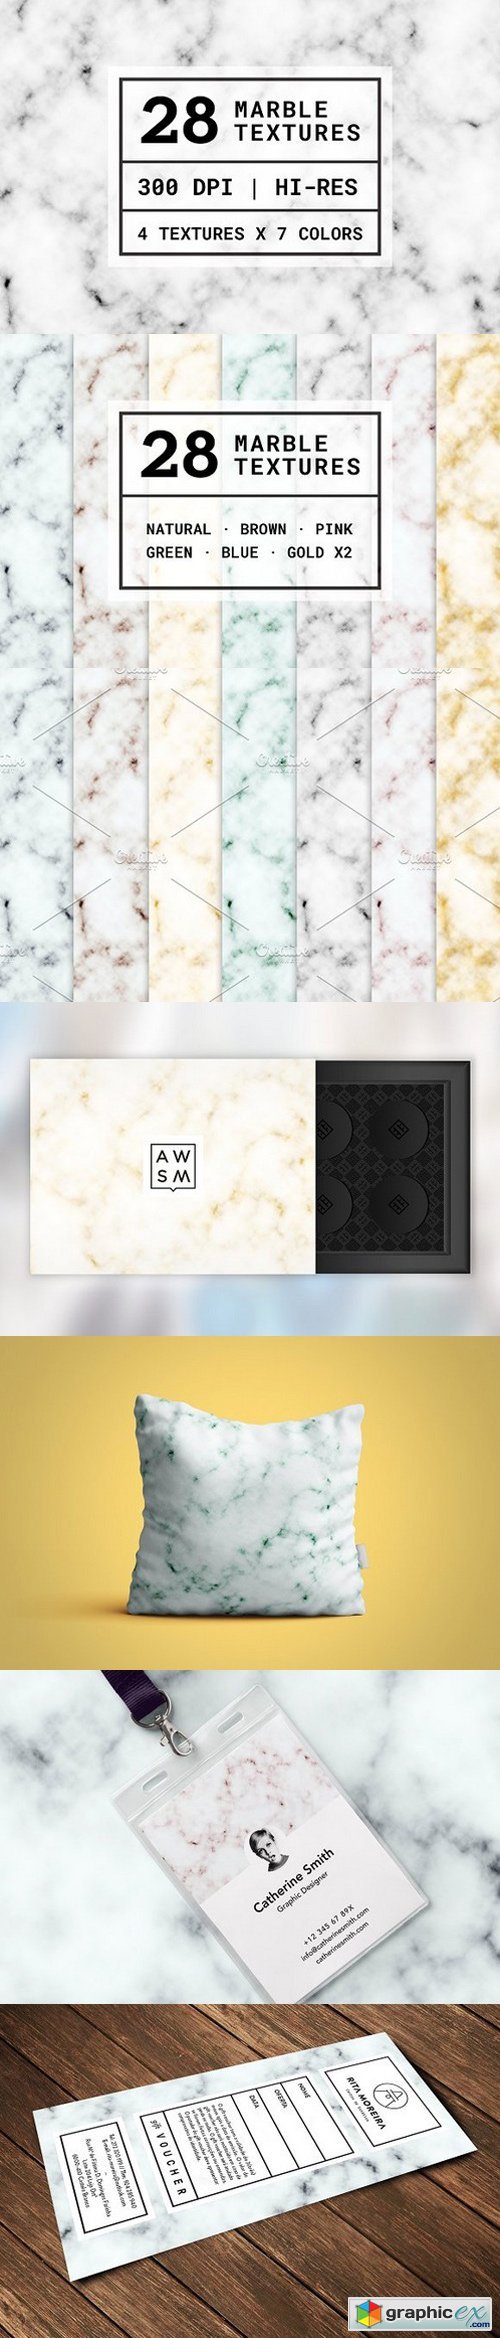 The AWSM Marble Textures Collection